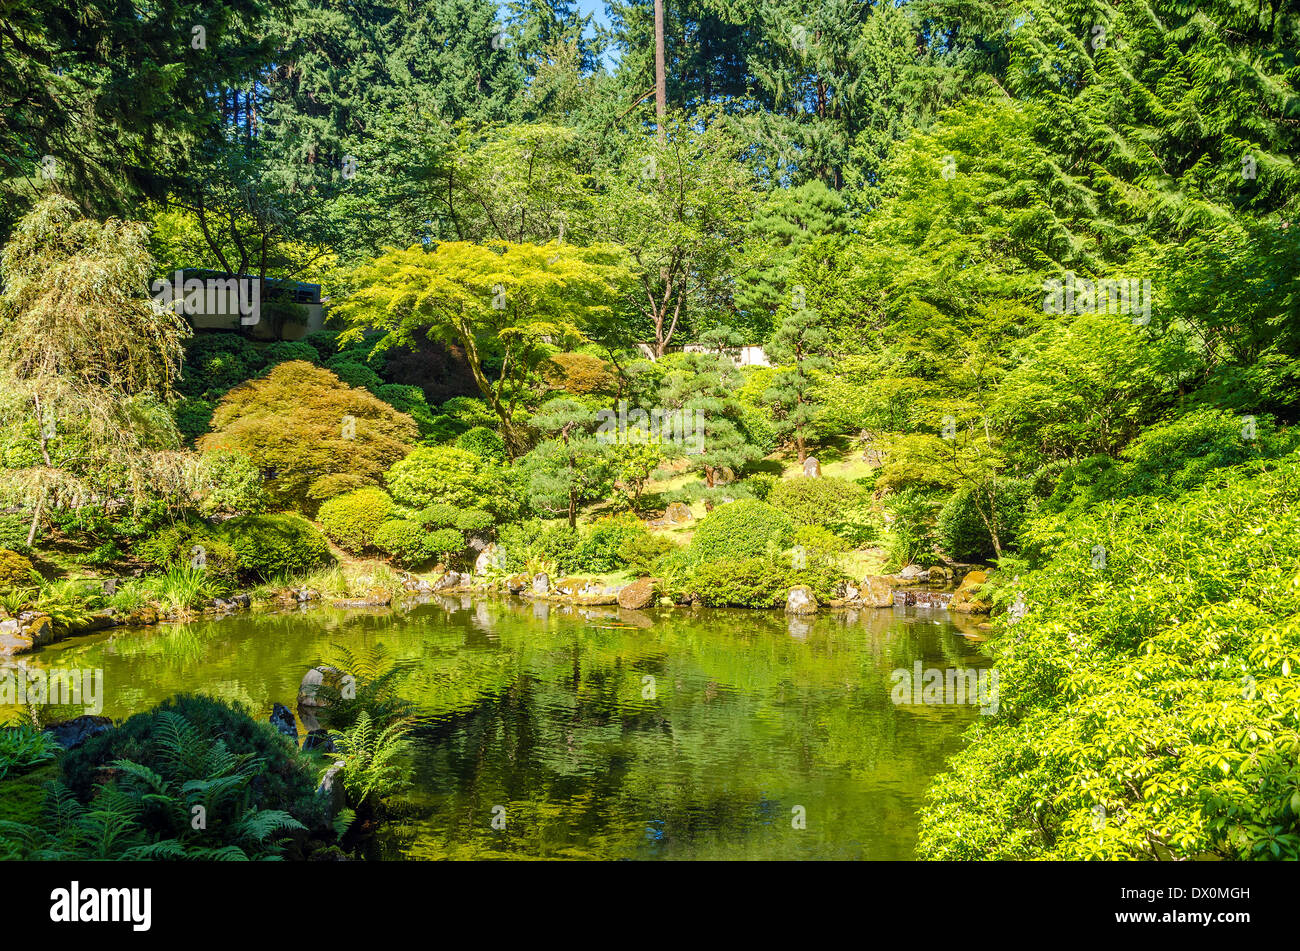 Lush green Japanese Garden and pond in Portland, Oregon Stock Photo